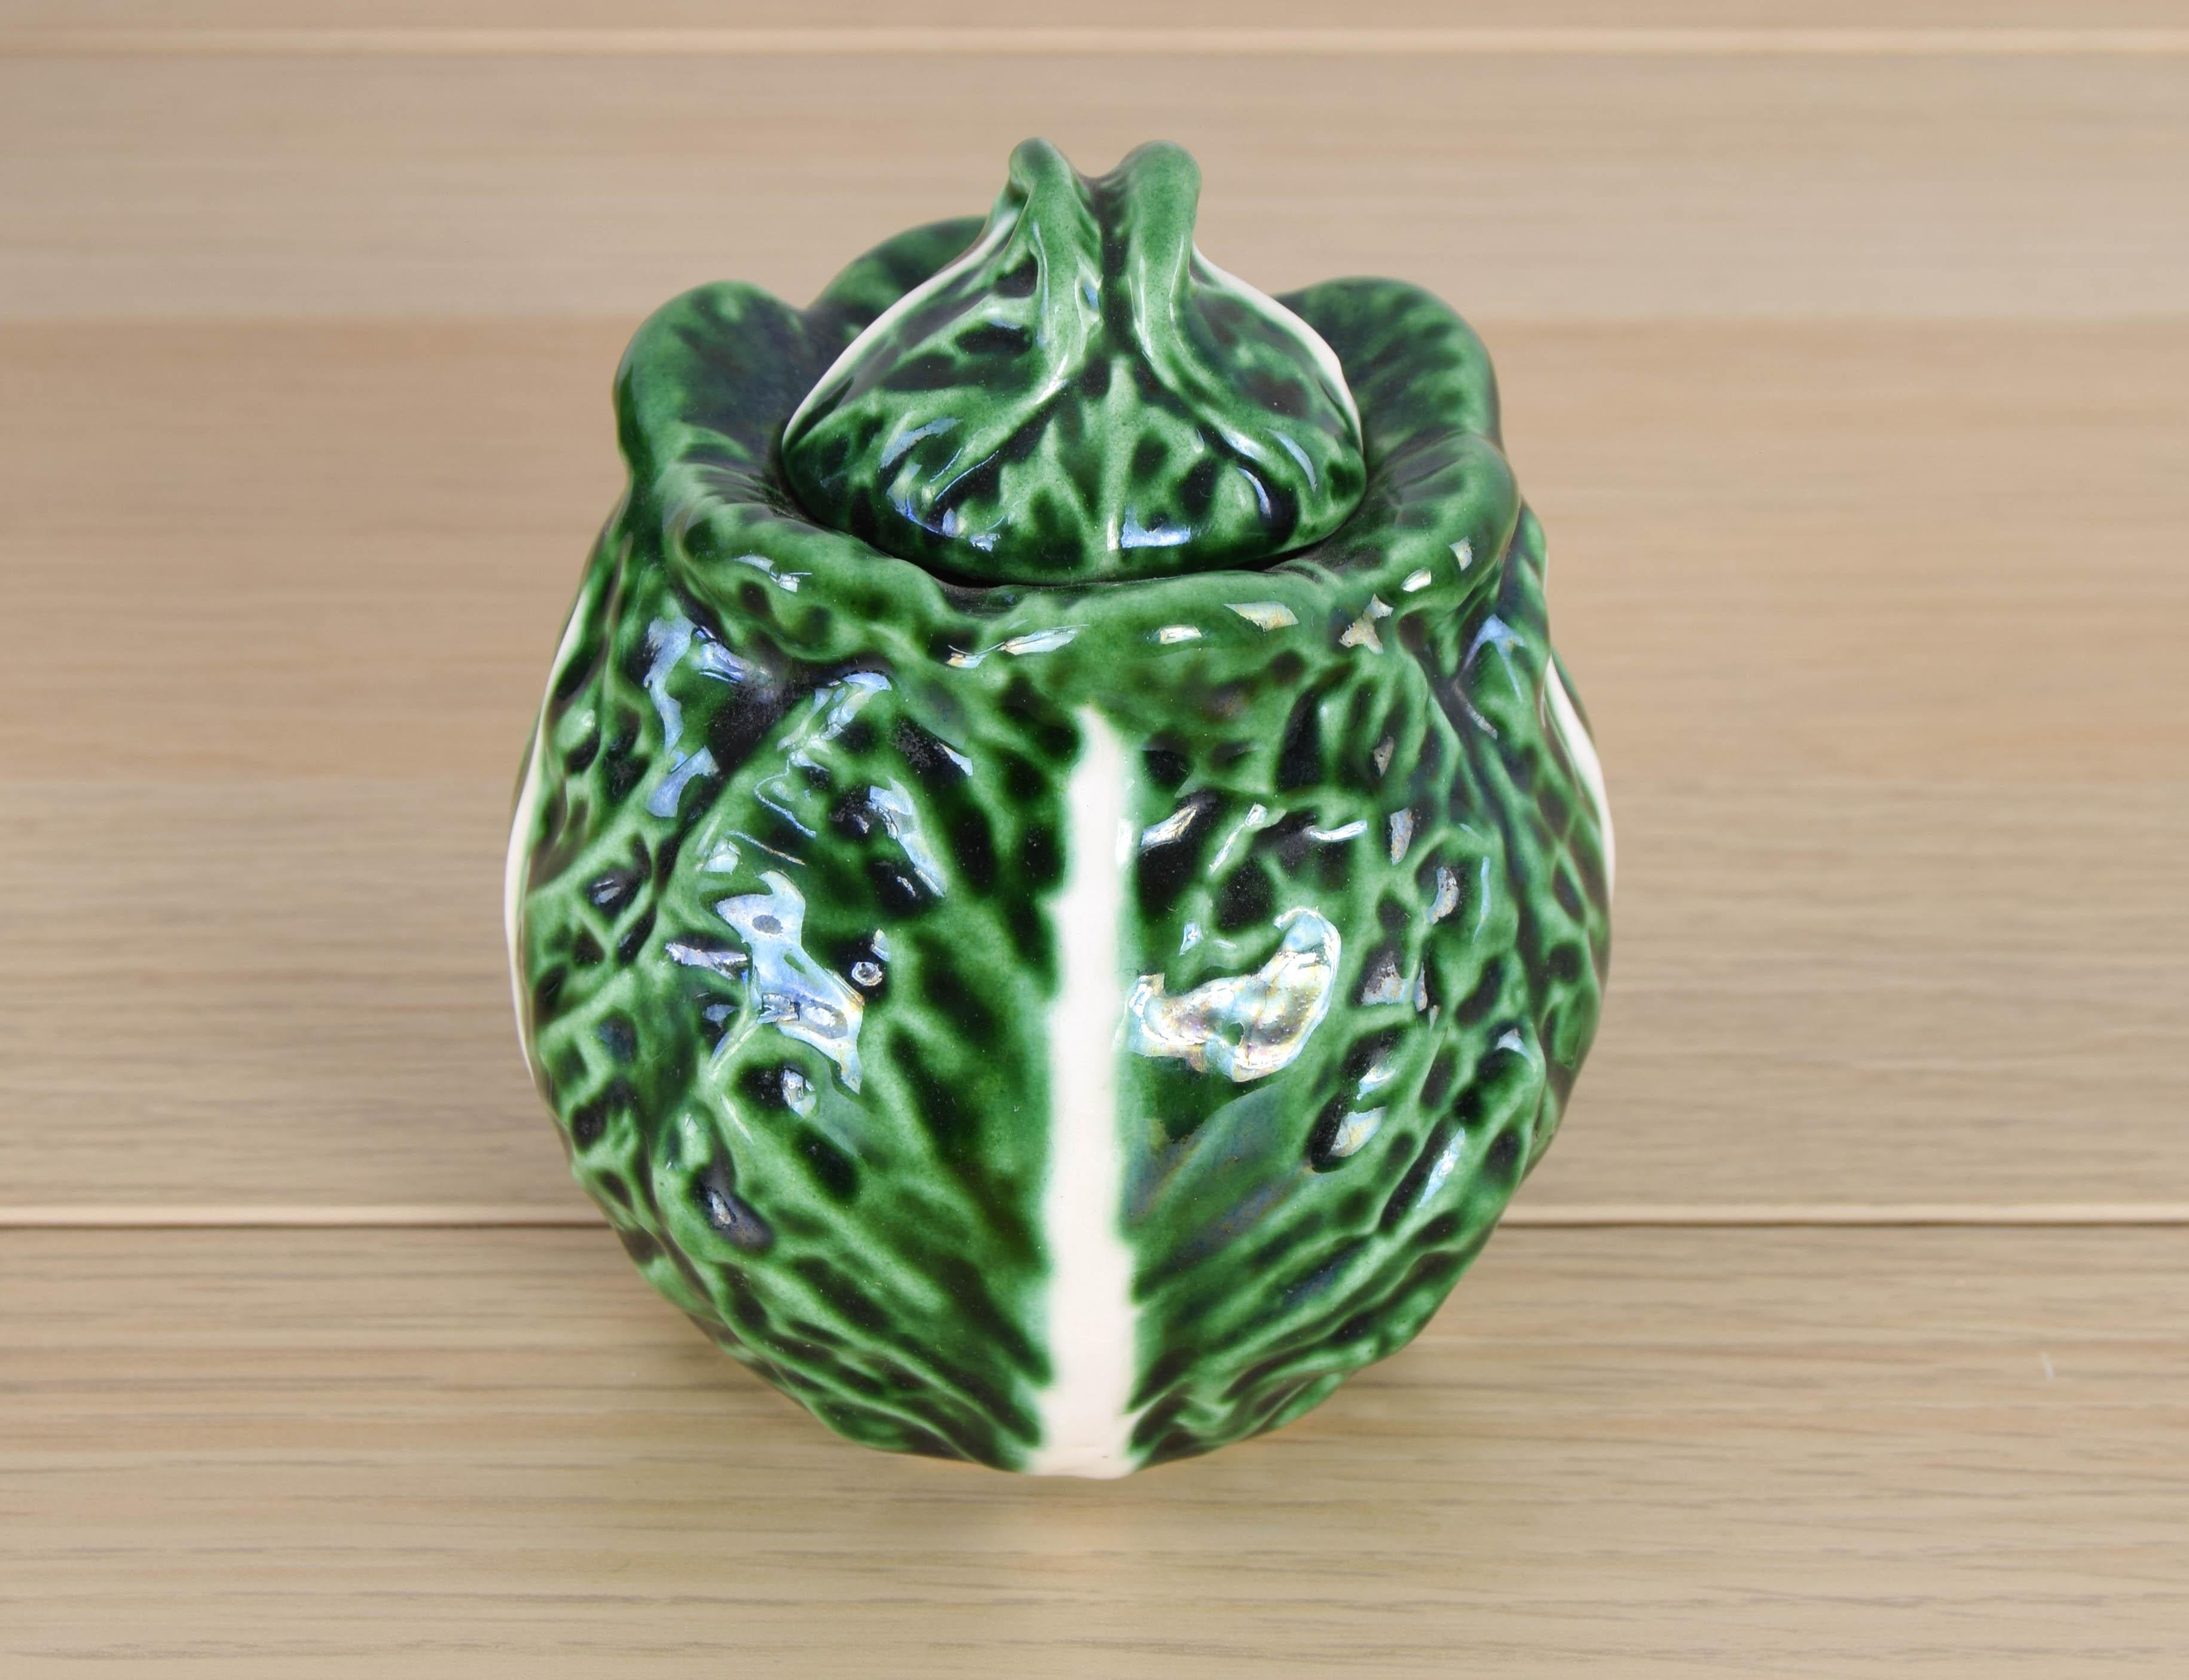 Beautiful and unique enameled ceramic salt shaker handmade in the shape of a cabbage leaf from Bordallo Pinheiro.
The salt shaker is missing enamel on the lid, otherwise it is in excellent condition.
These pieces, famous from the high society of the